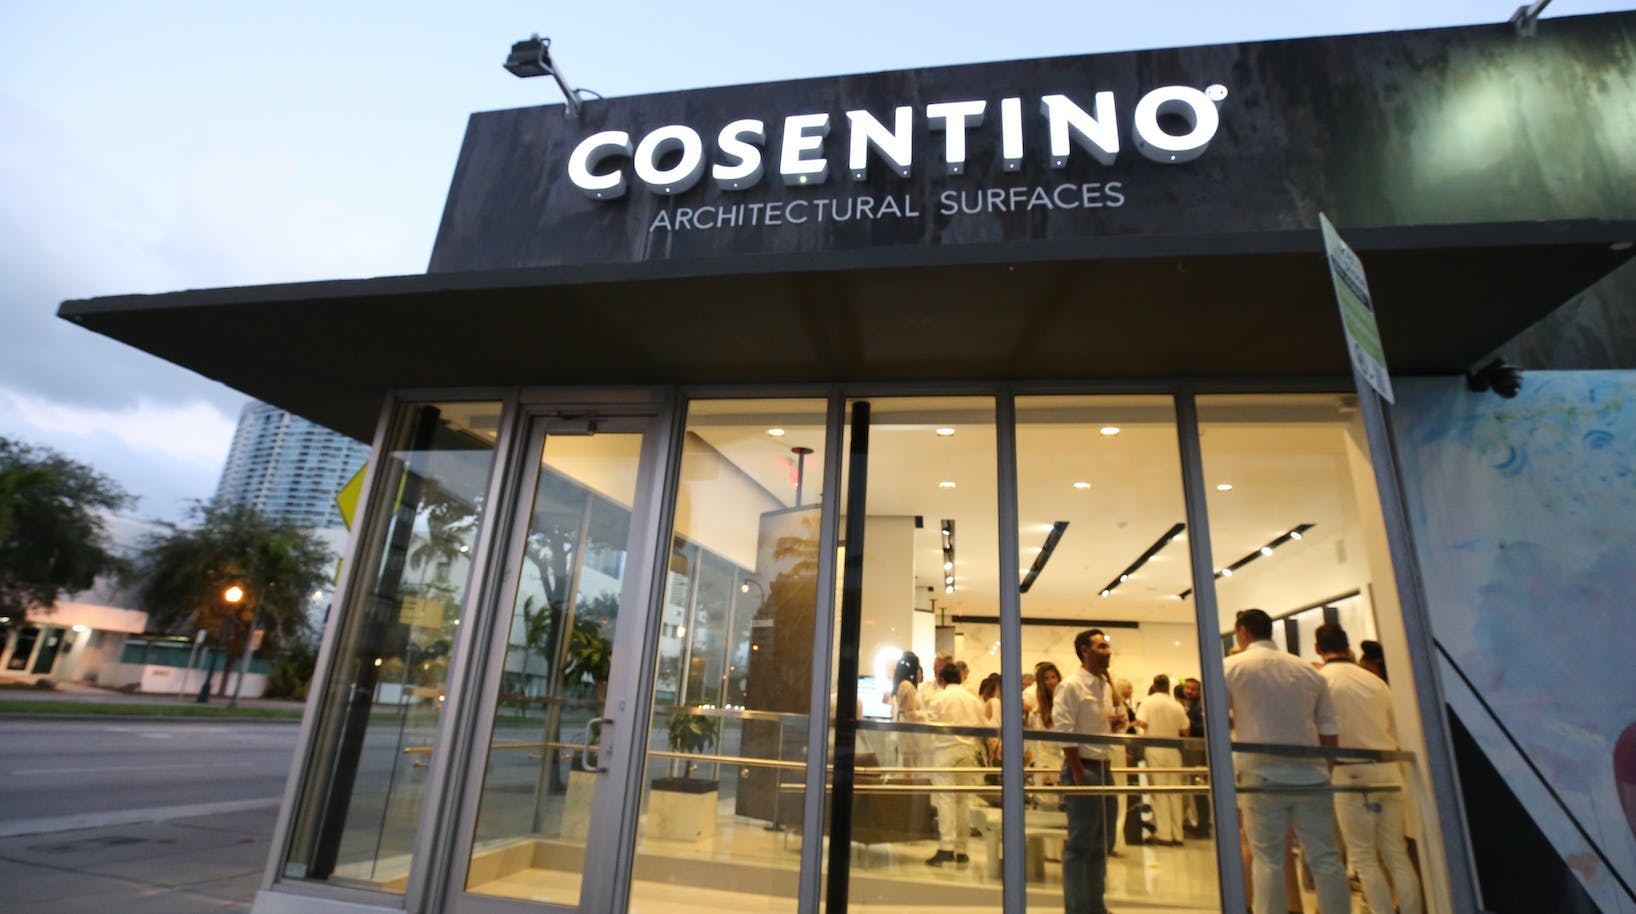 Image 33 of Screen Shot 2019 05 24 at 11.47.47 AM in Cosentino Hosts an All-White Themed Party to Celebrate the First Anniversary of the Miami Cosentino City Showroom - Cosentino